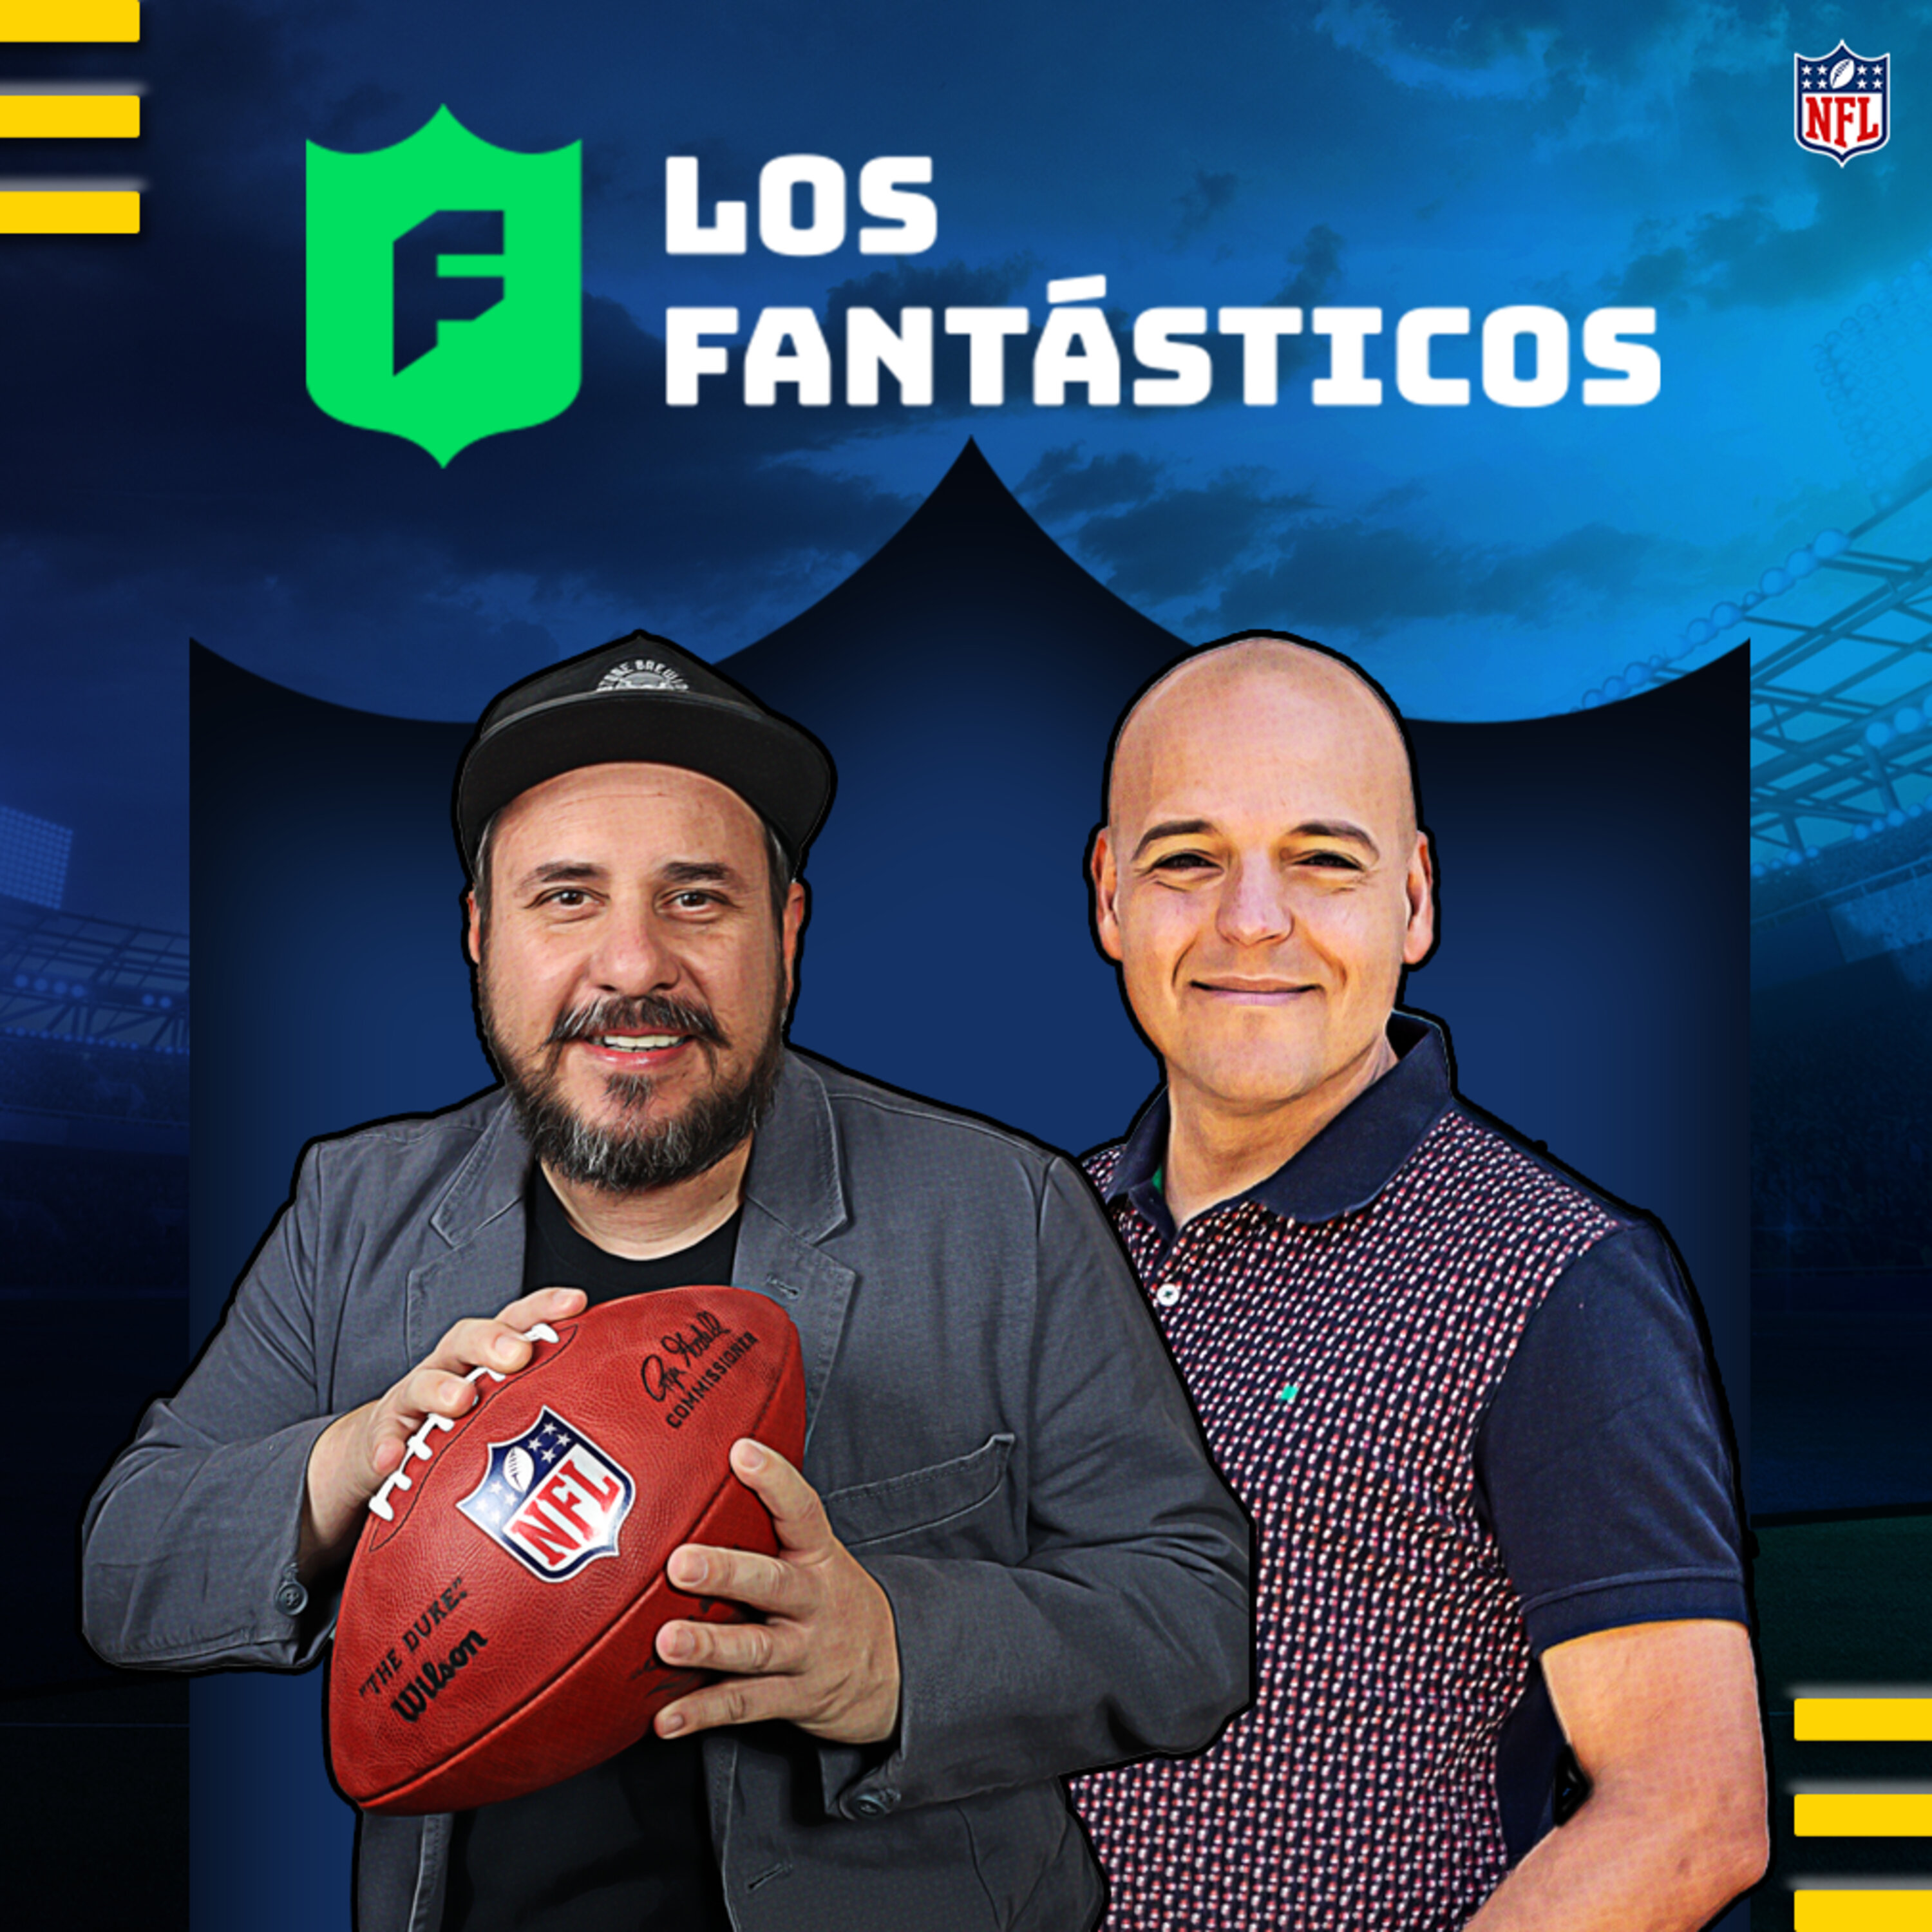 The Bleav Fantasy Football Show with Michael Fabiano: Week 4 Start 'Em &  Sit 'Em with DFS Plays & TNF Props